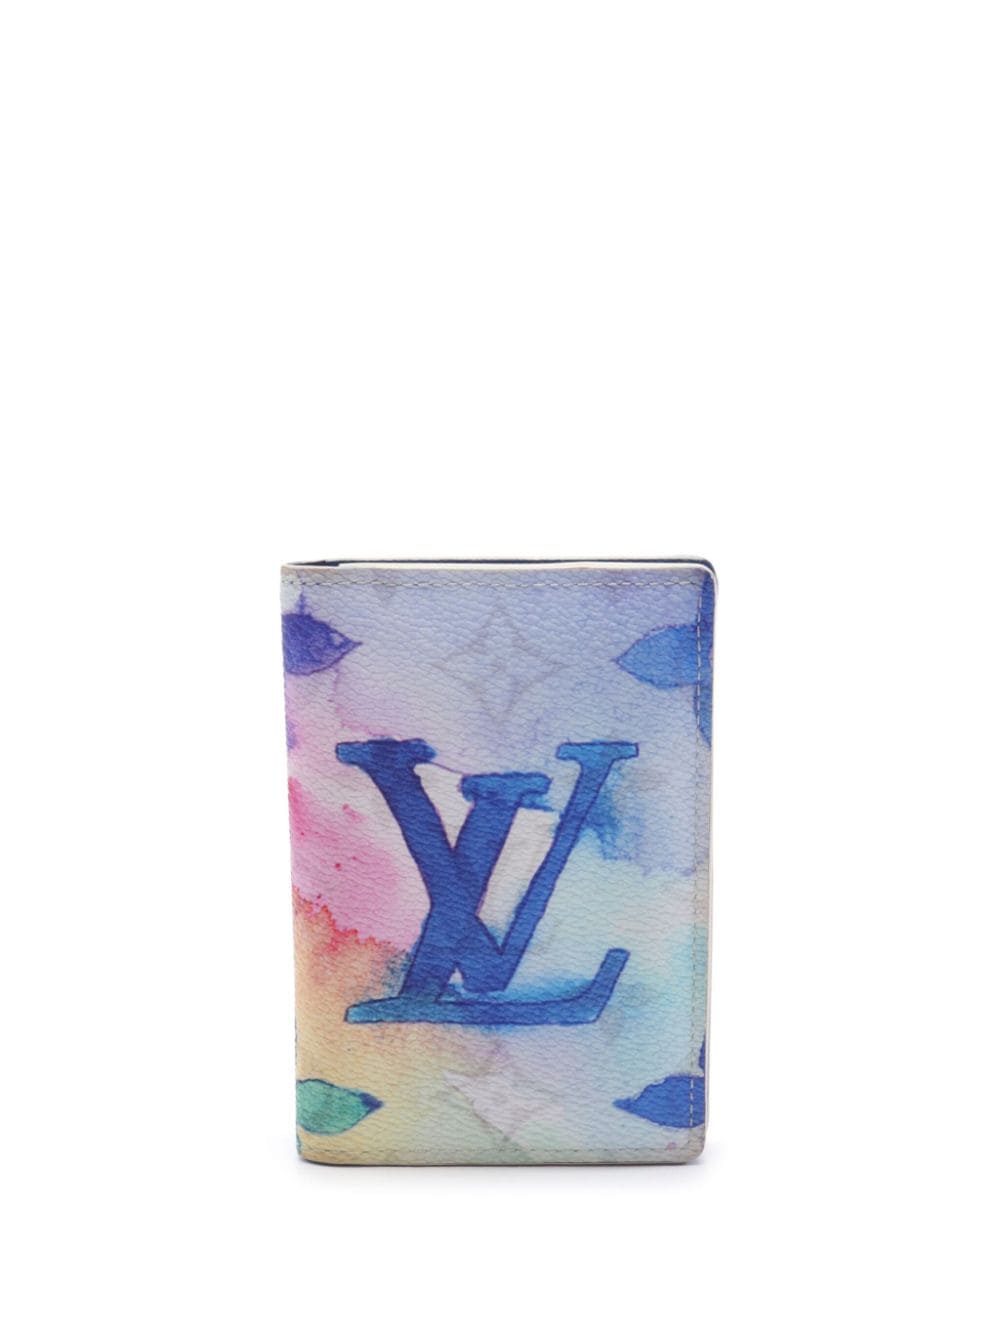 Brand New In Box Louis Vuitton Blue Watercolor Monogram Leather Wallet